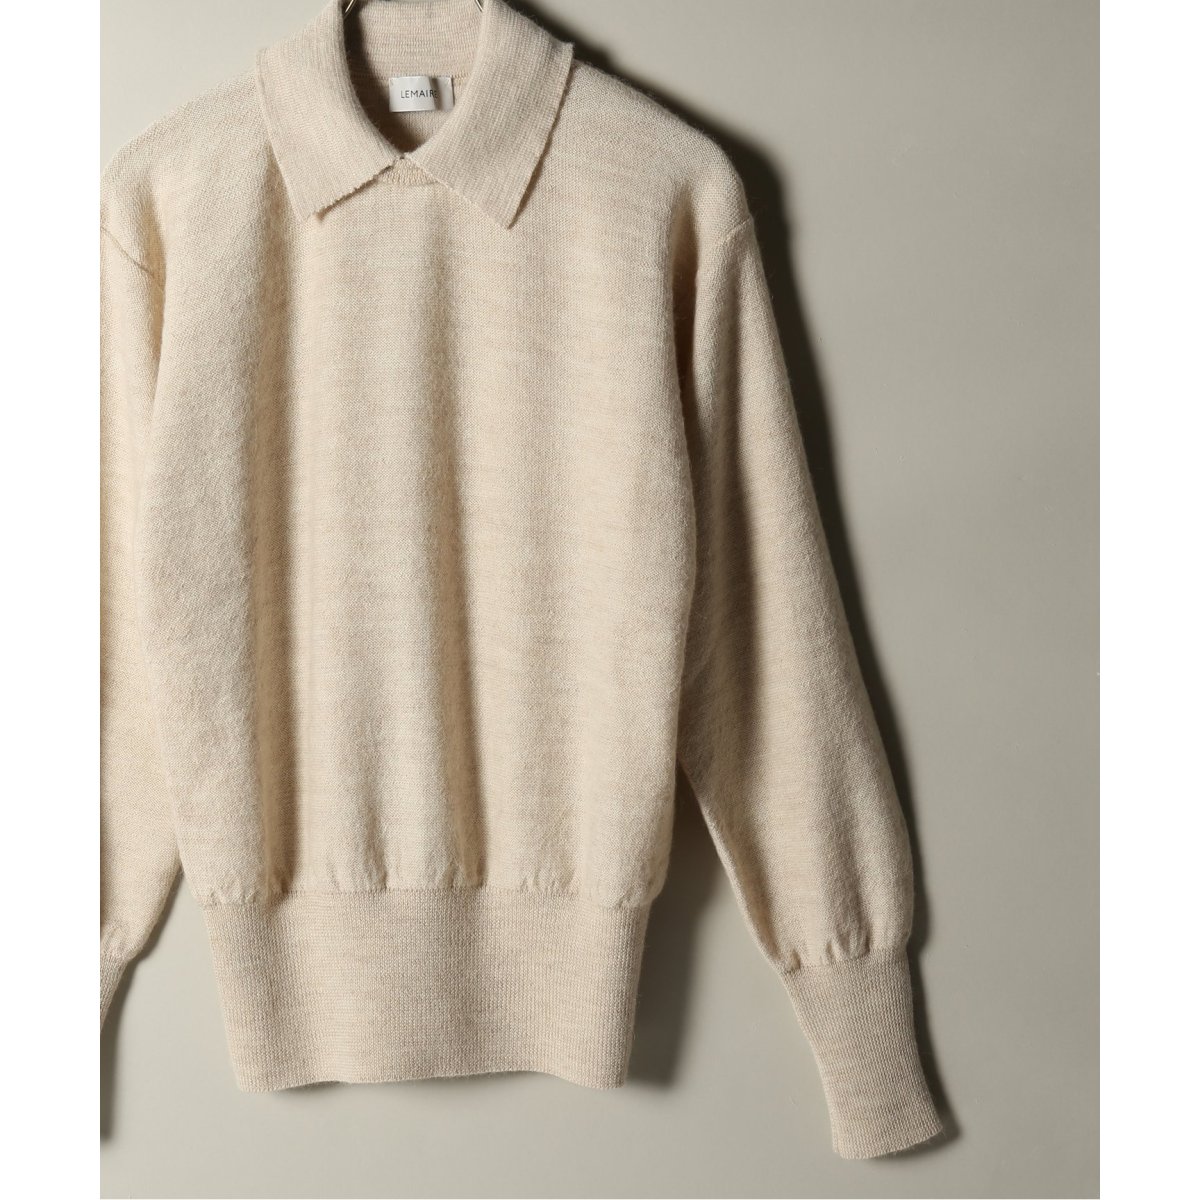 LEMAIRE/ルメール】DOUBLE COLLAR SWEATER equaljustice.wy.gov